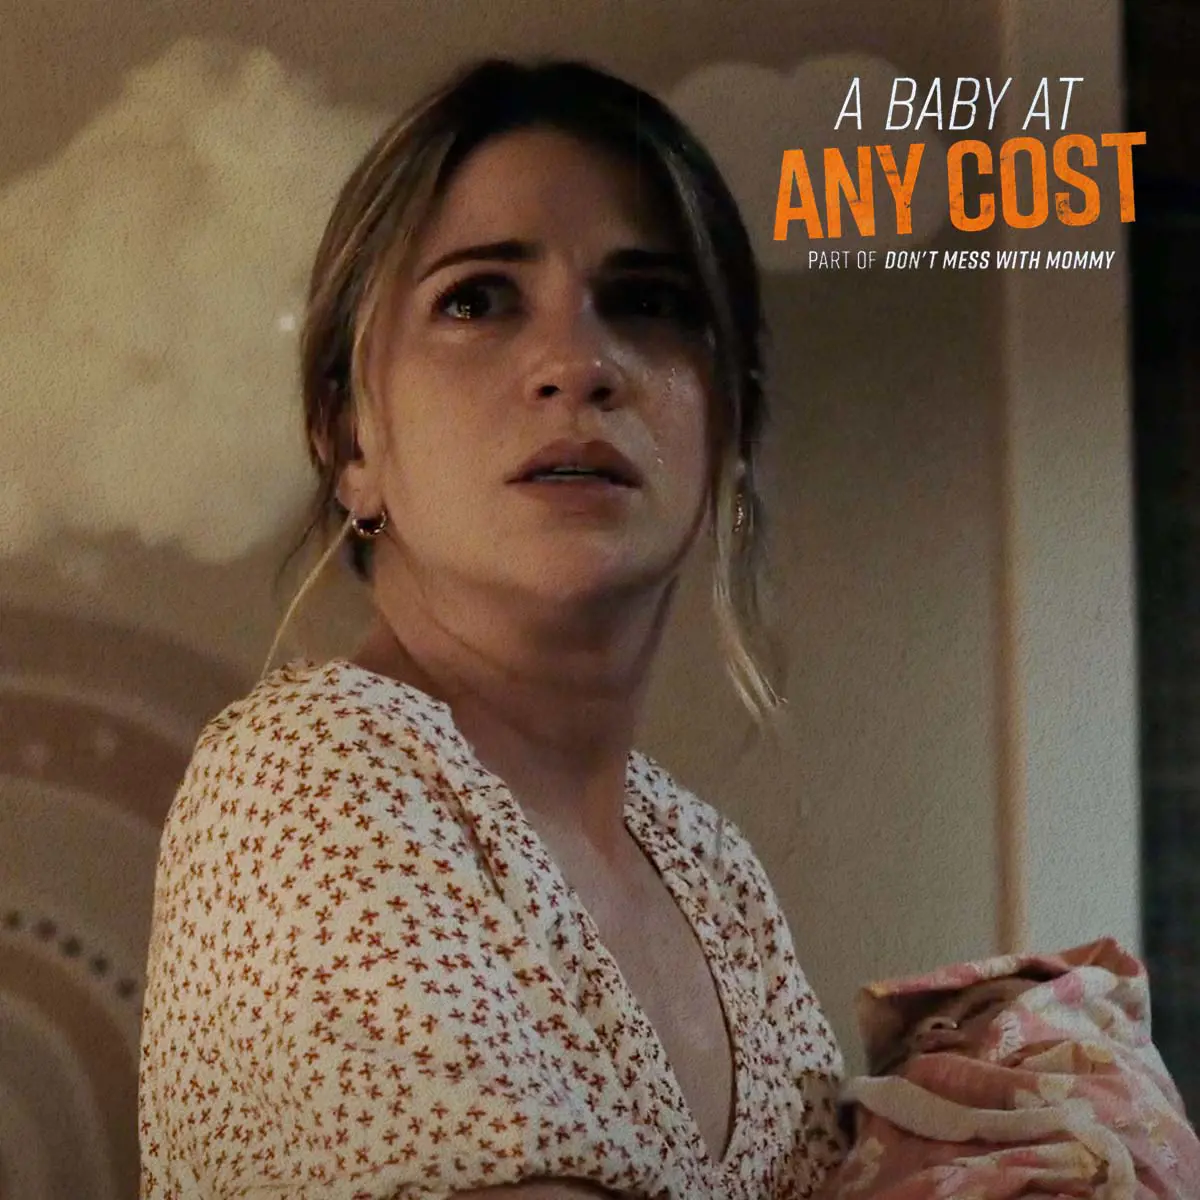 A Baby At Any Cost is another baby film from Lifetime Movies